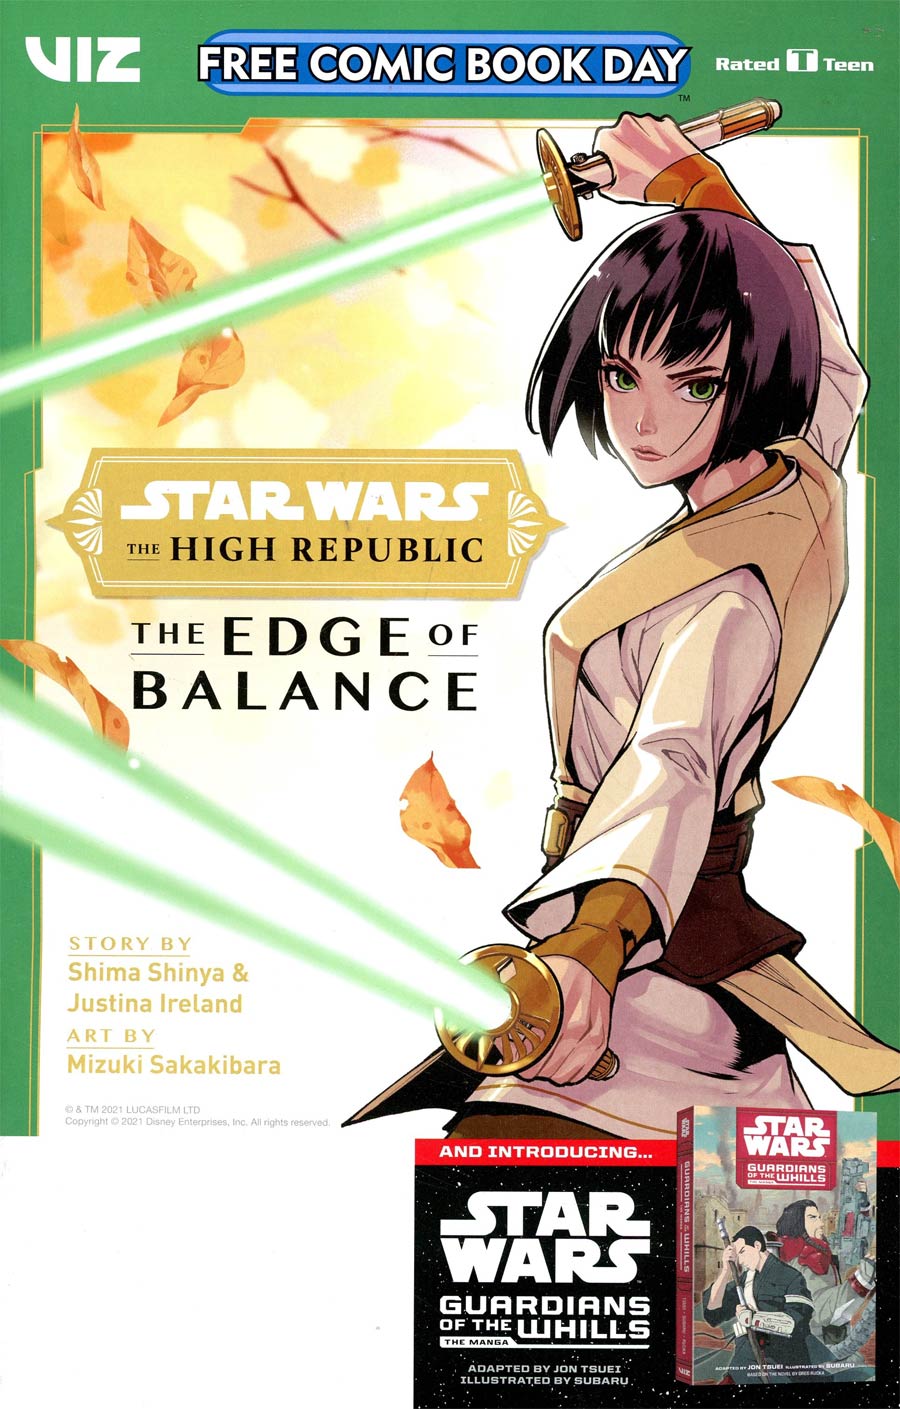 Star Wars The High Republic Edge Of Balance / Guardians Of The Whills FCBD 2021 Edition